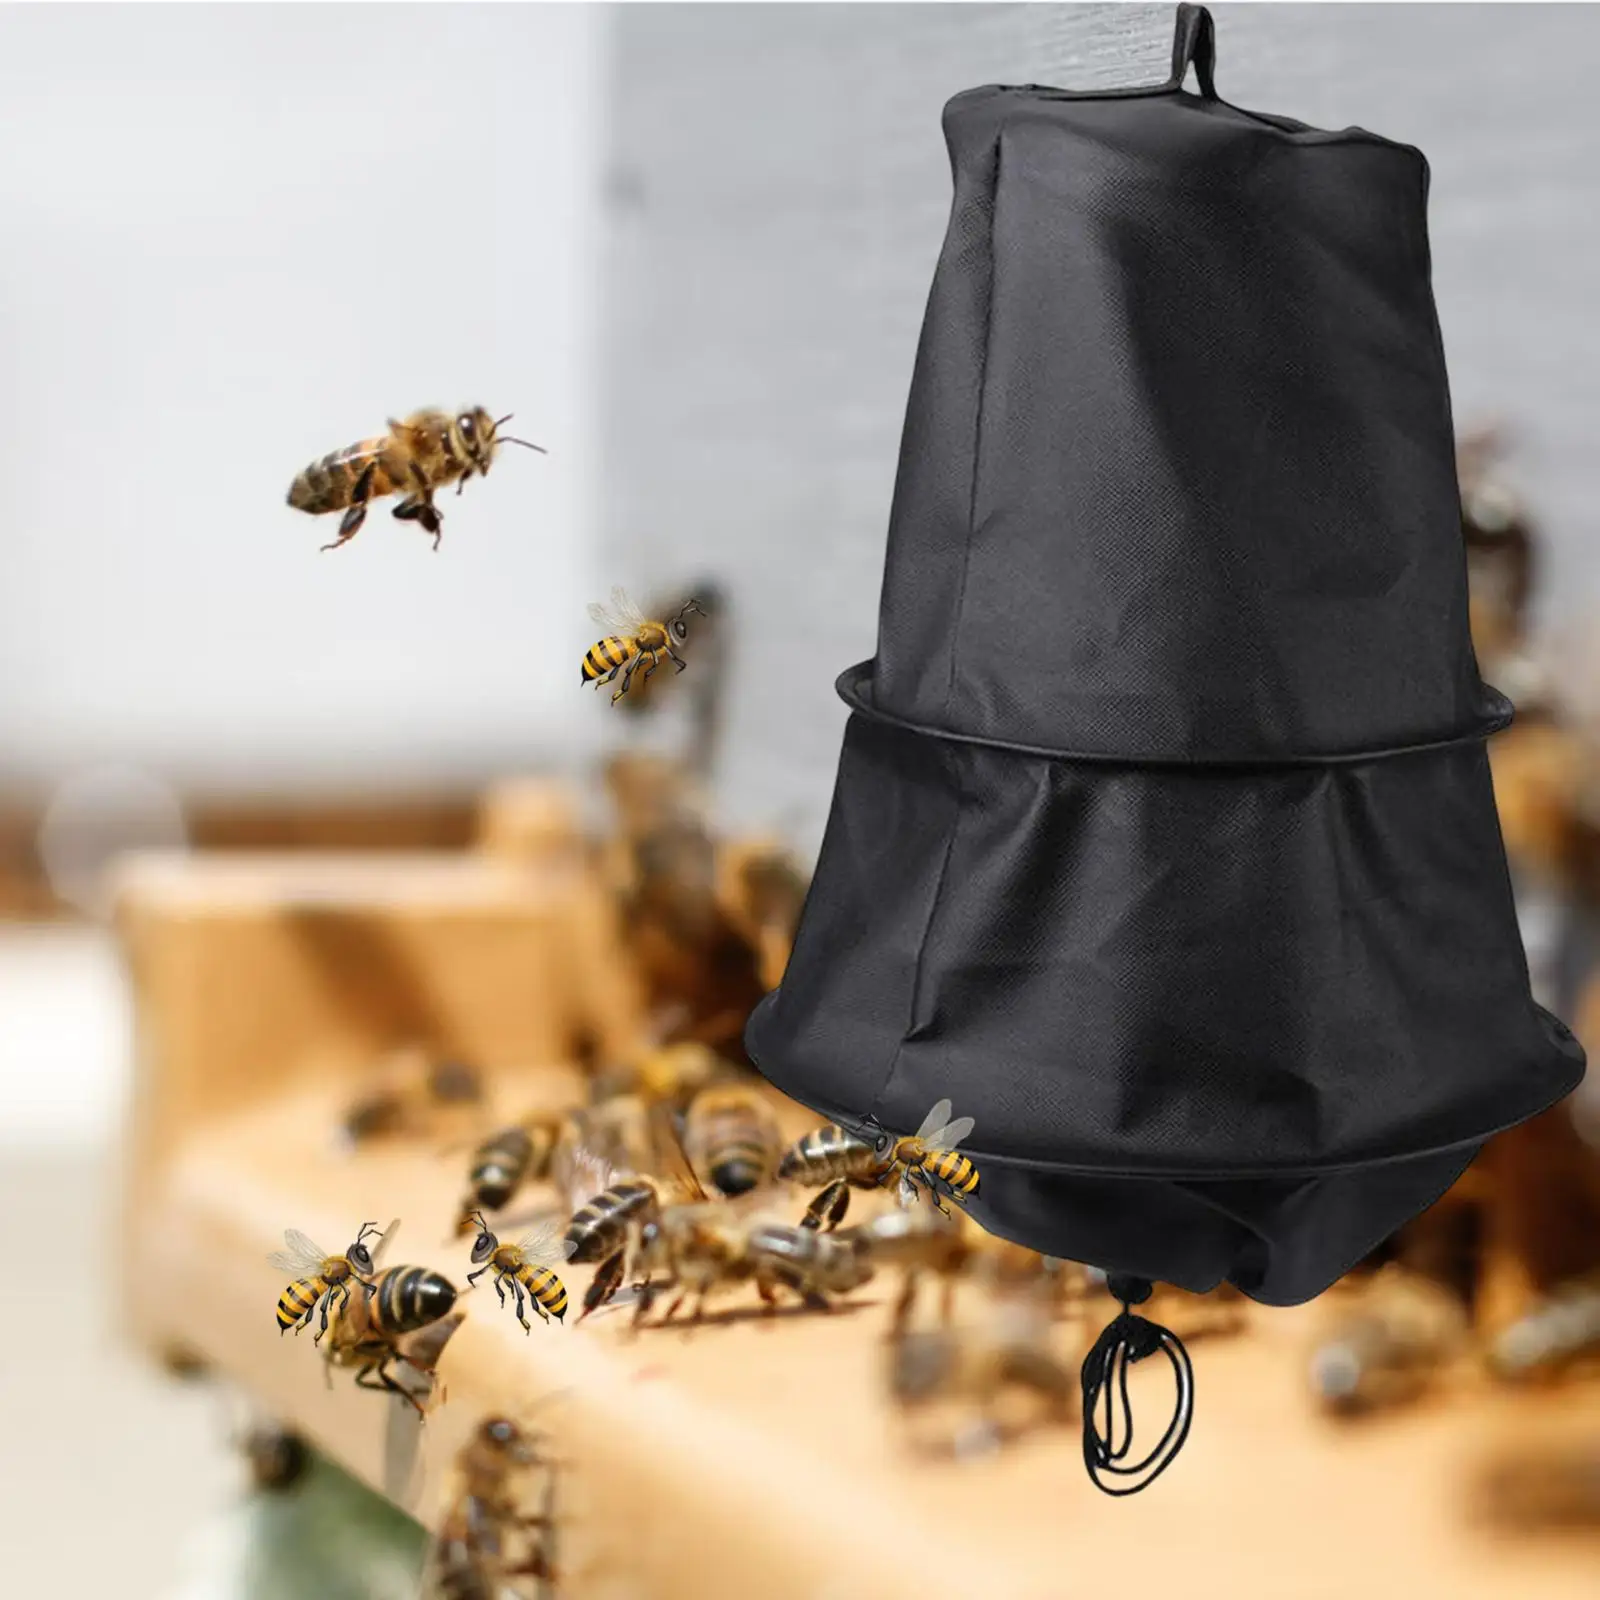 Black Swarm Trap Bee Cage Beekeeping Catching Tool Reusable Soft Loop On Top Swarming Catcher Accessories Safe Beekeeper Tool